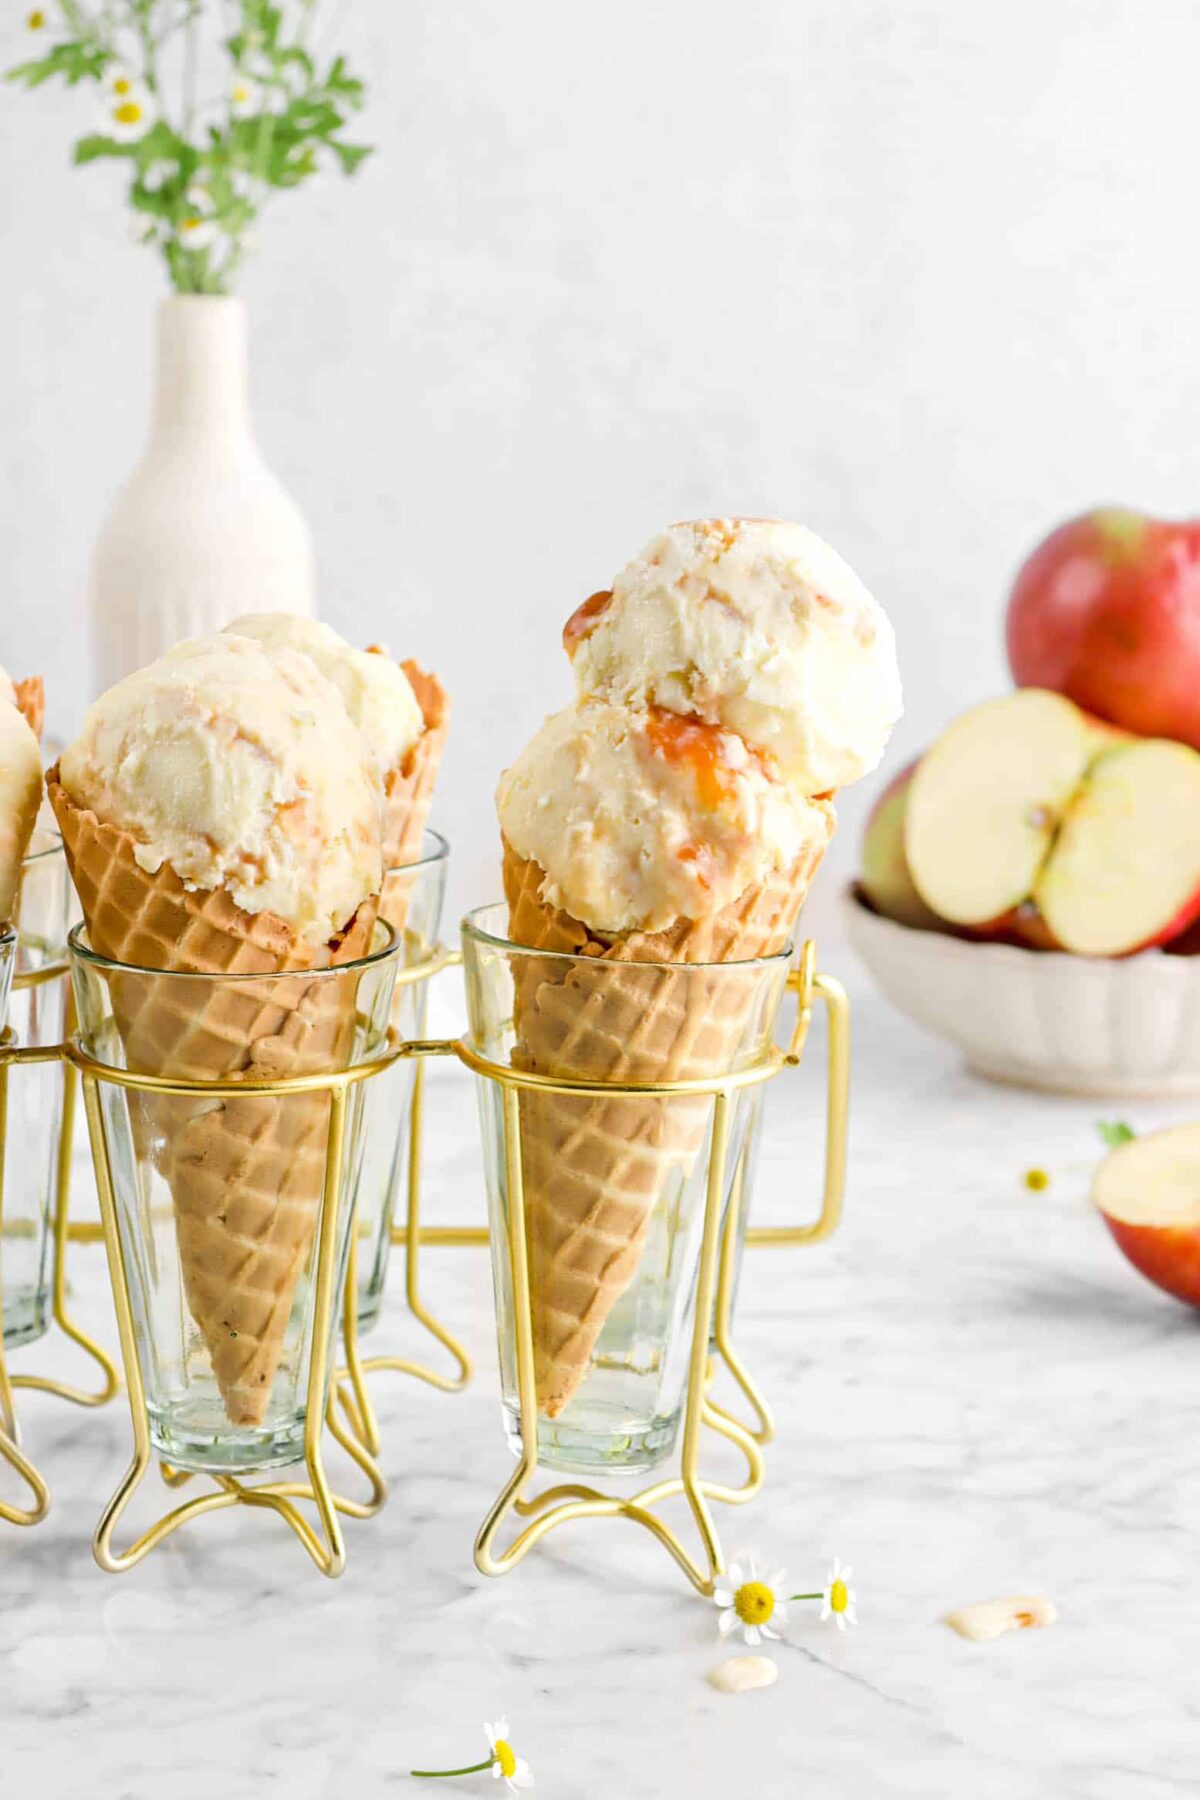 caramel apple ice cream in waffle cones with apples behind